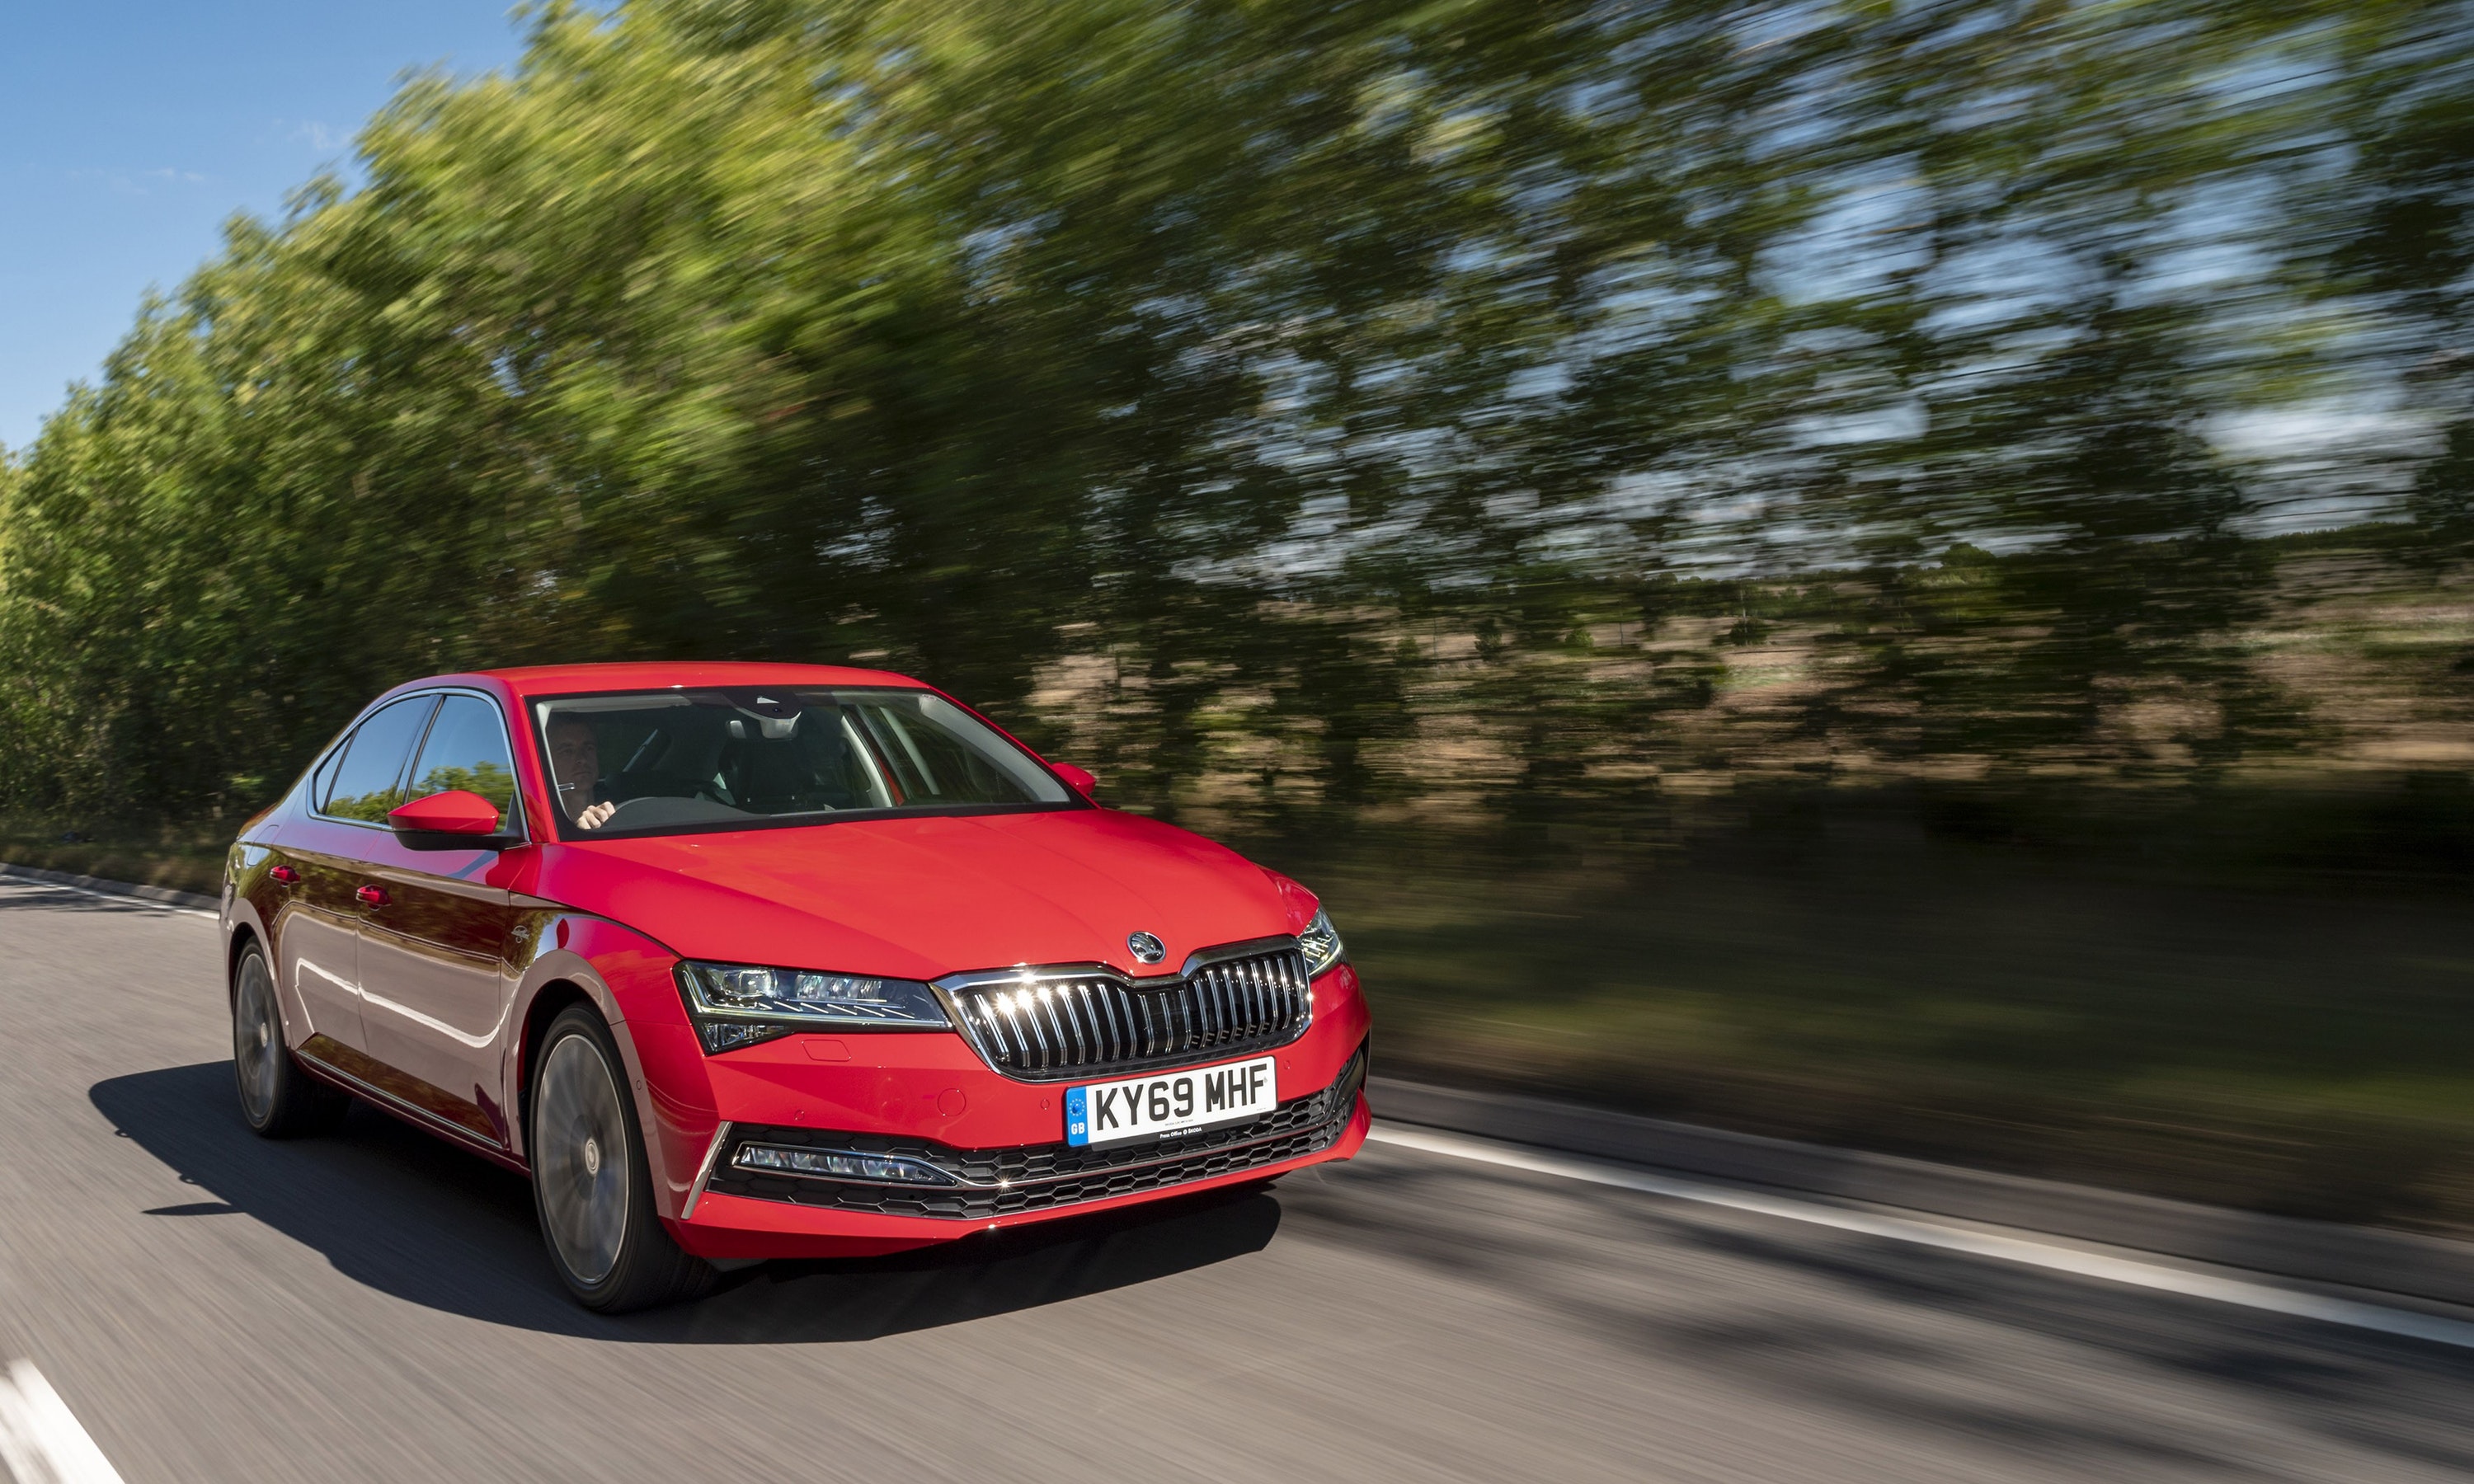 ŠKODA SUPERB with the new equipment for even better comfort and